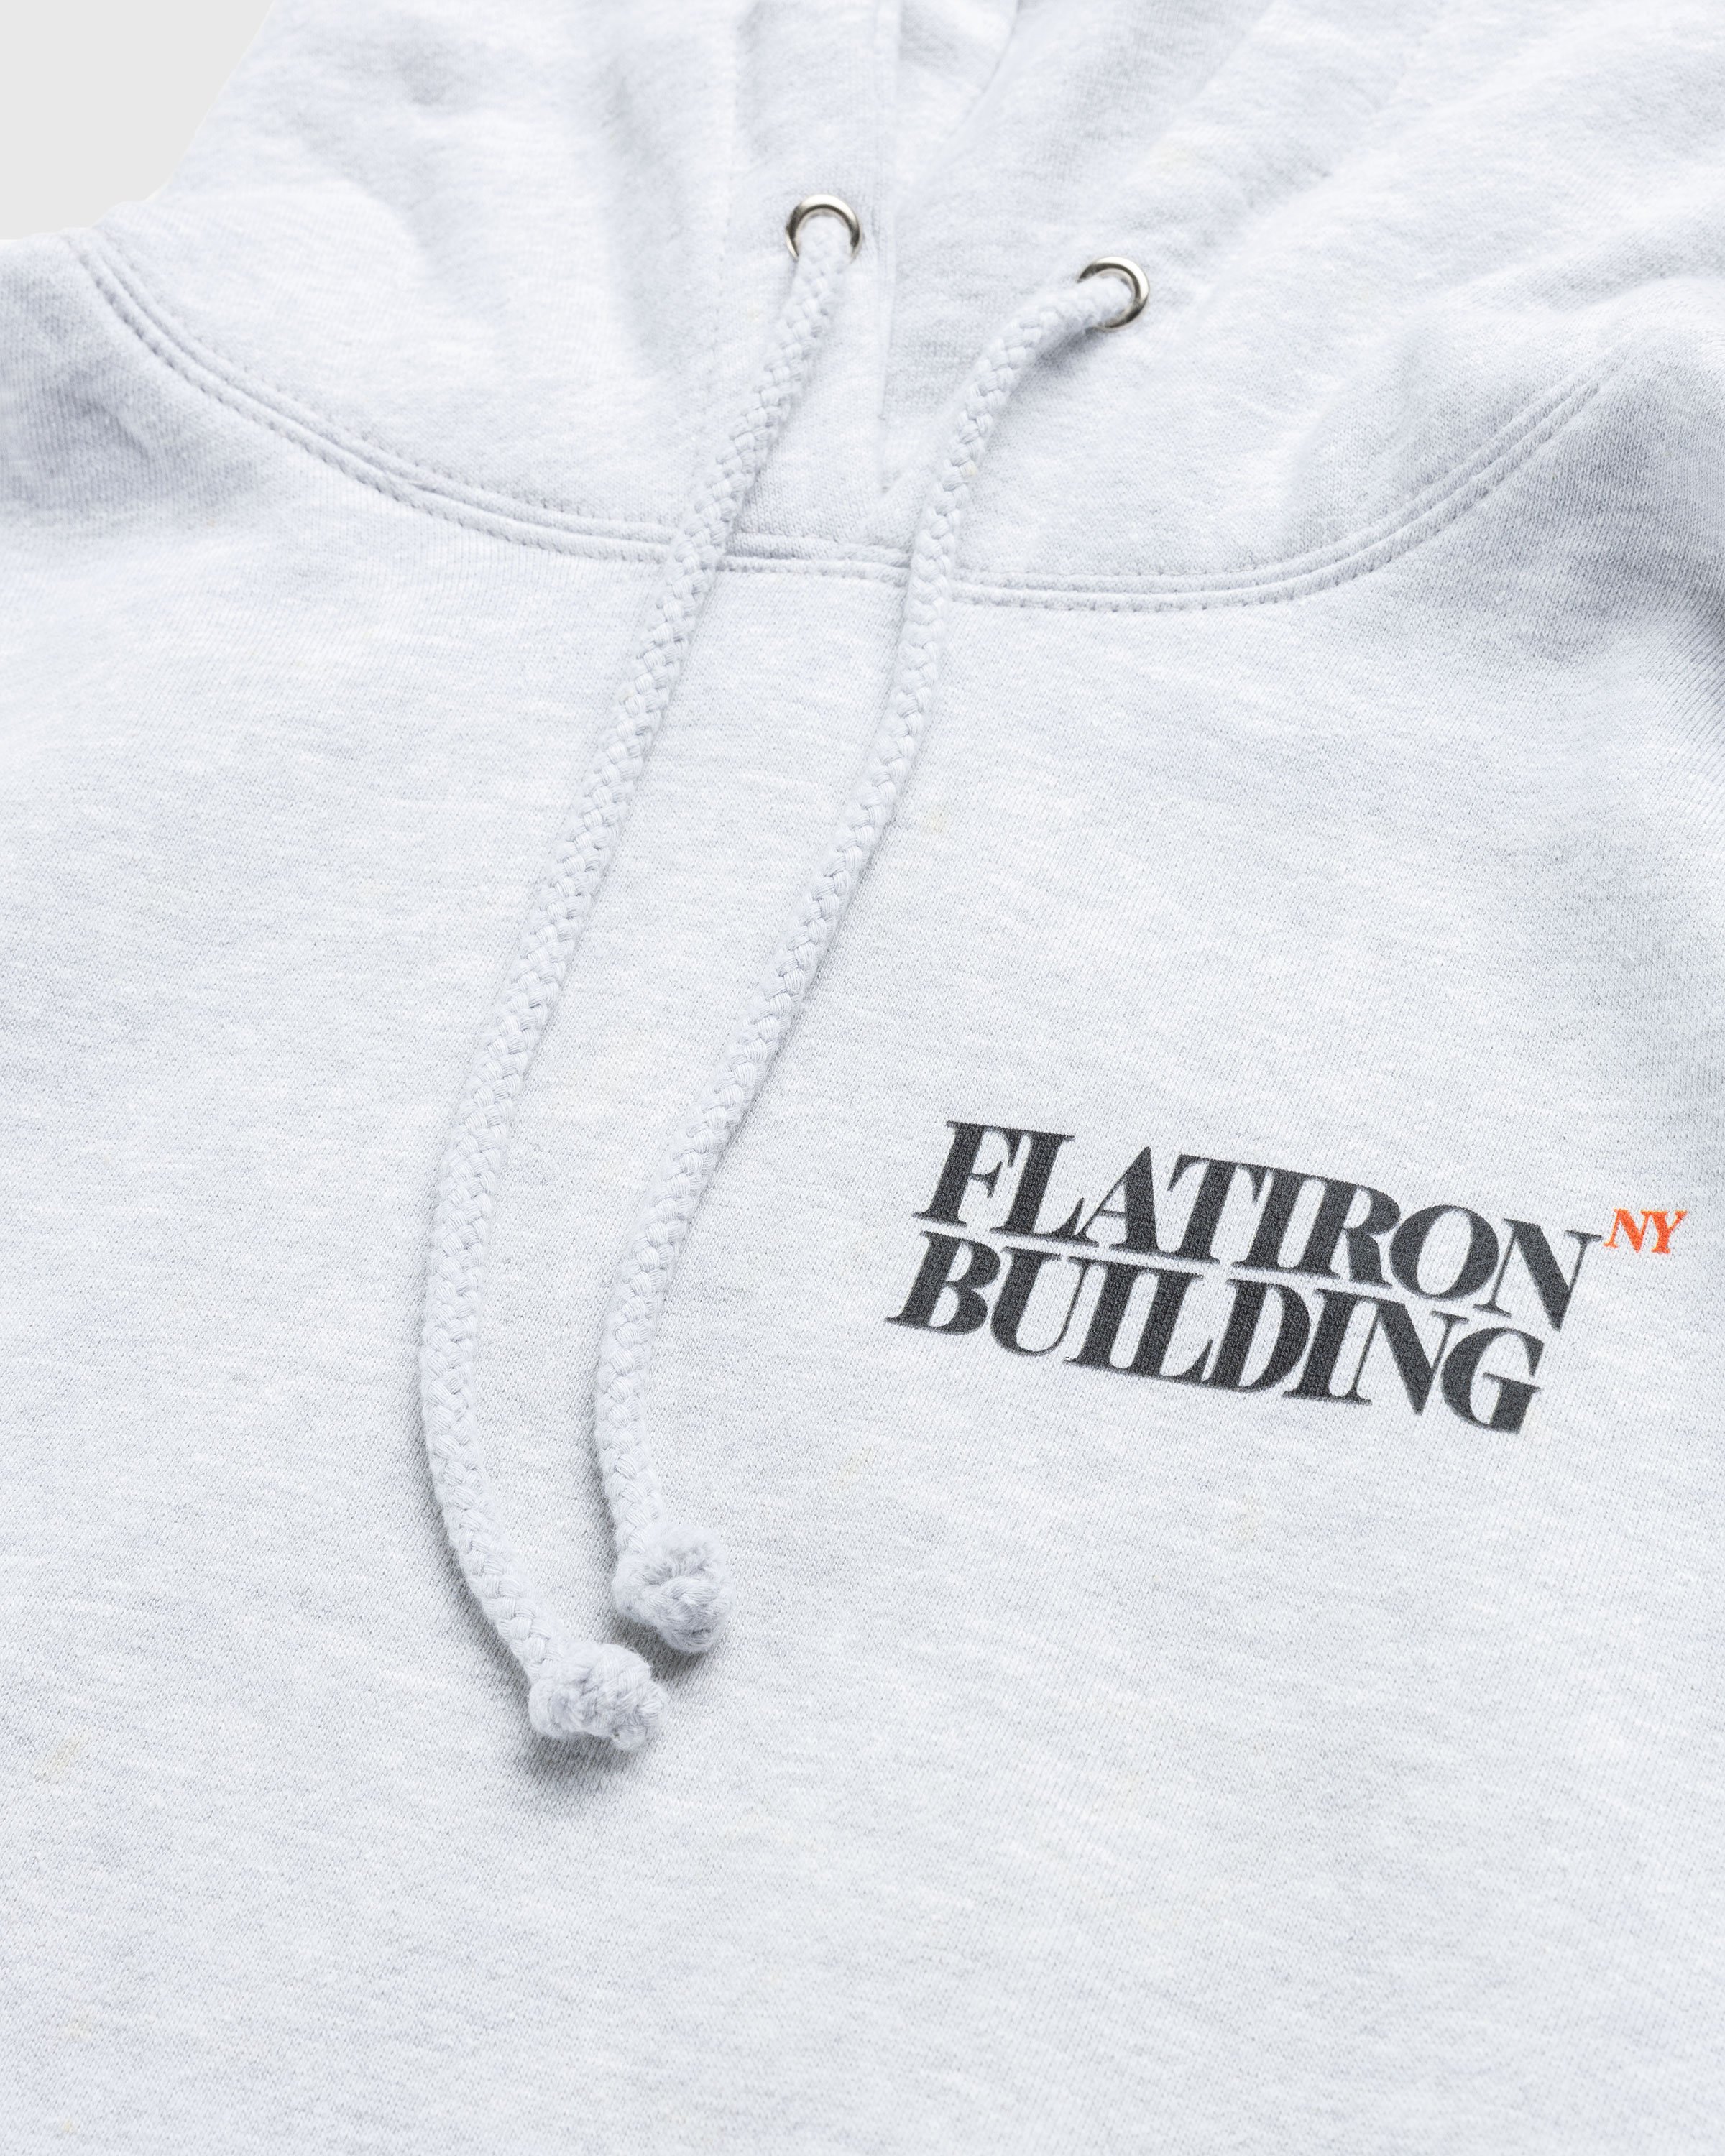 At The Moment x Highsnobiety - Flatiron Building Hoodie - Clothing - Grey - Image 7